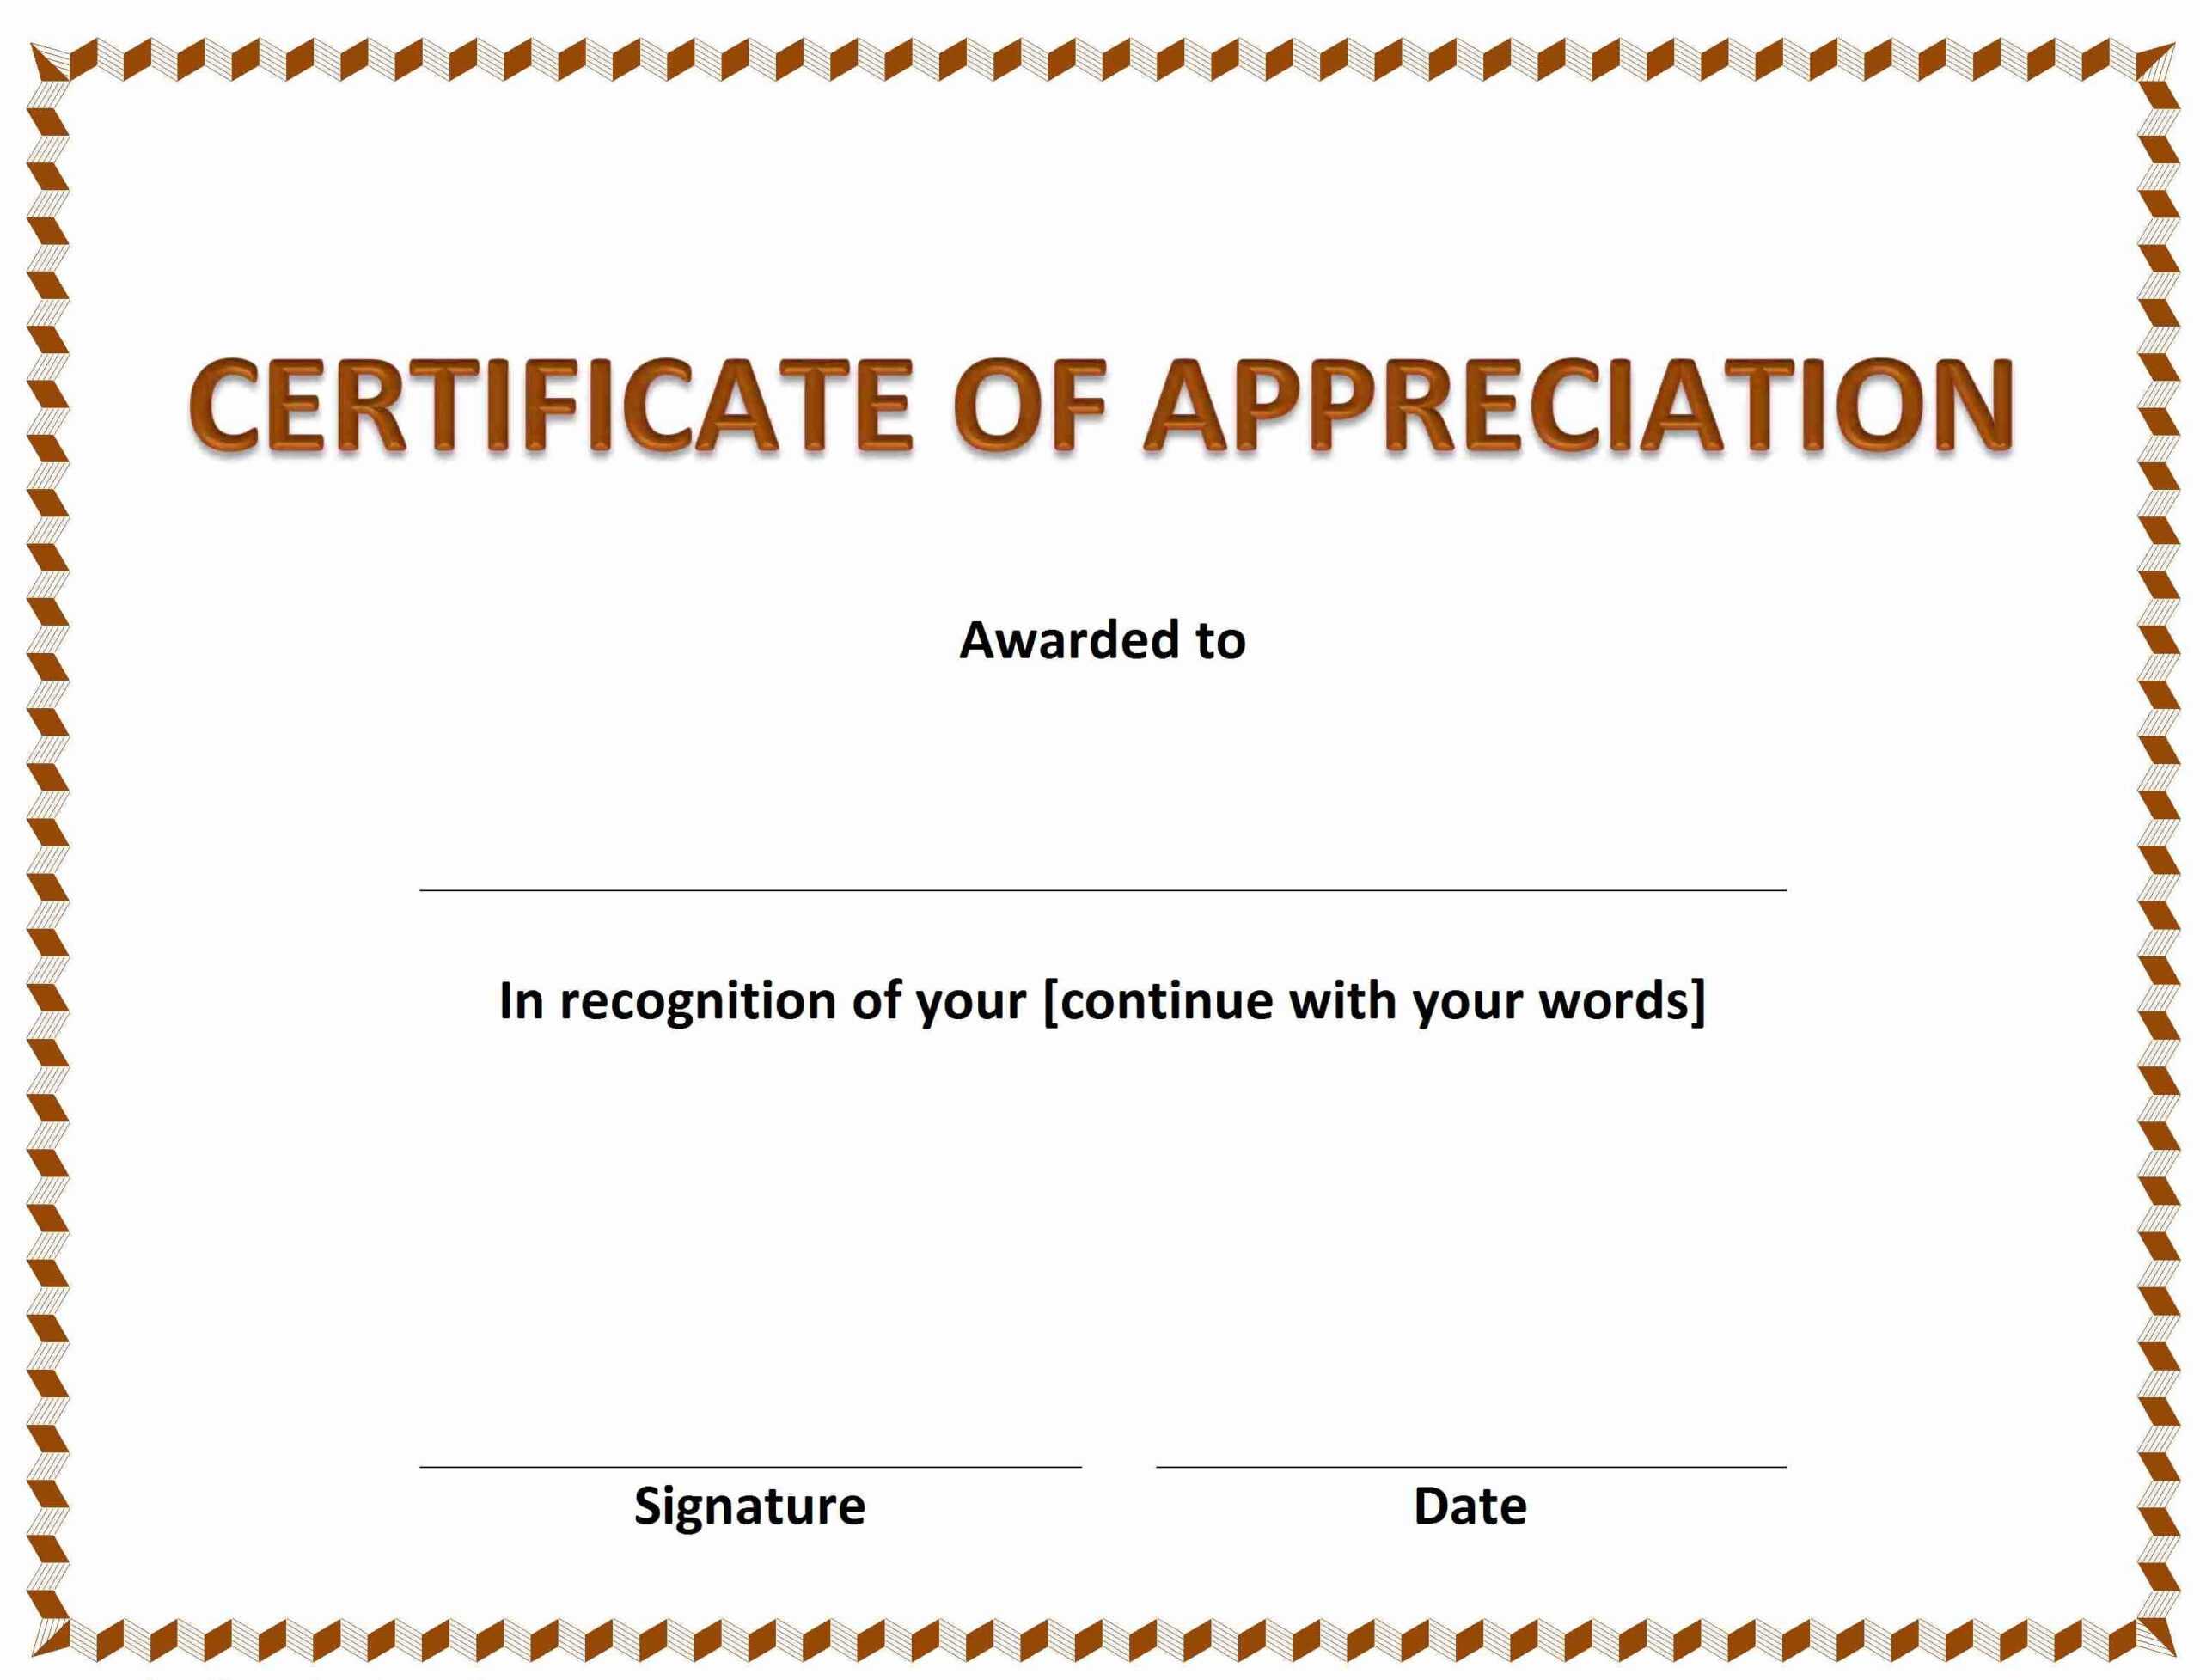 024 Certificates Of Appreciations Popular Ideas Awesome Within Free Funny Certificate Templates For Word